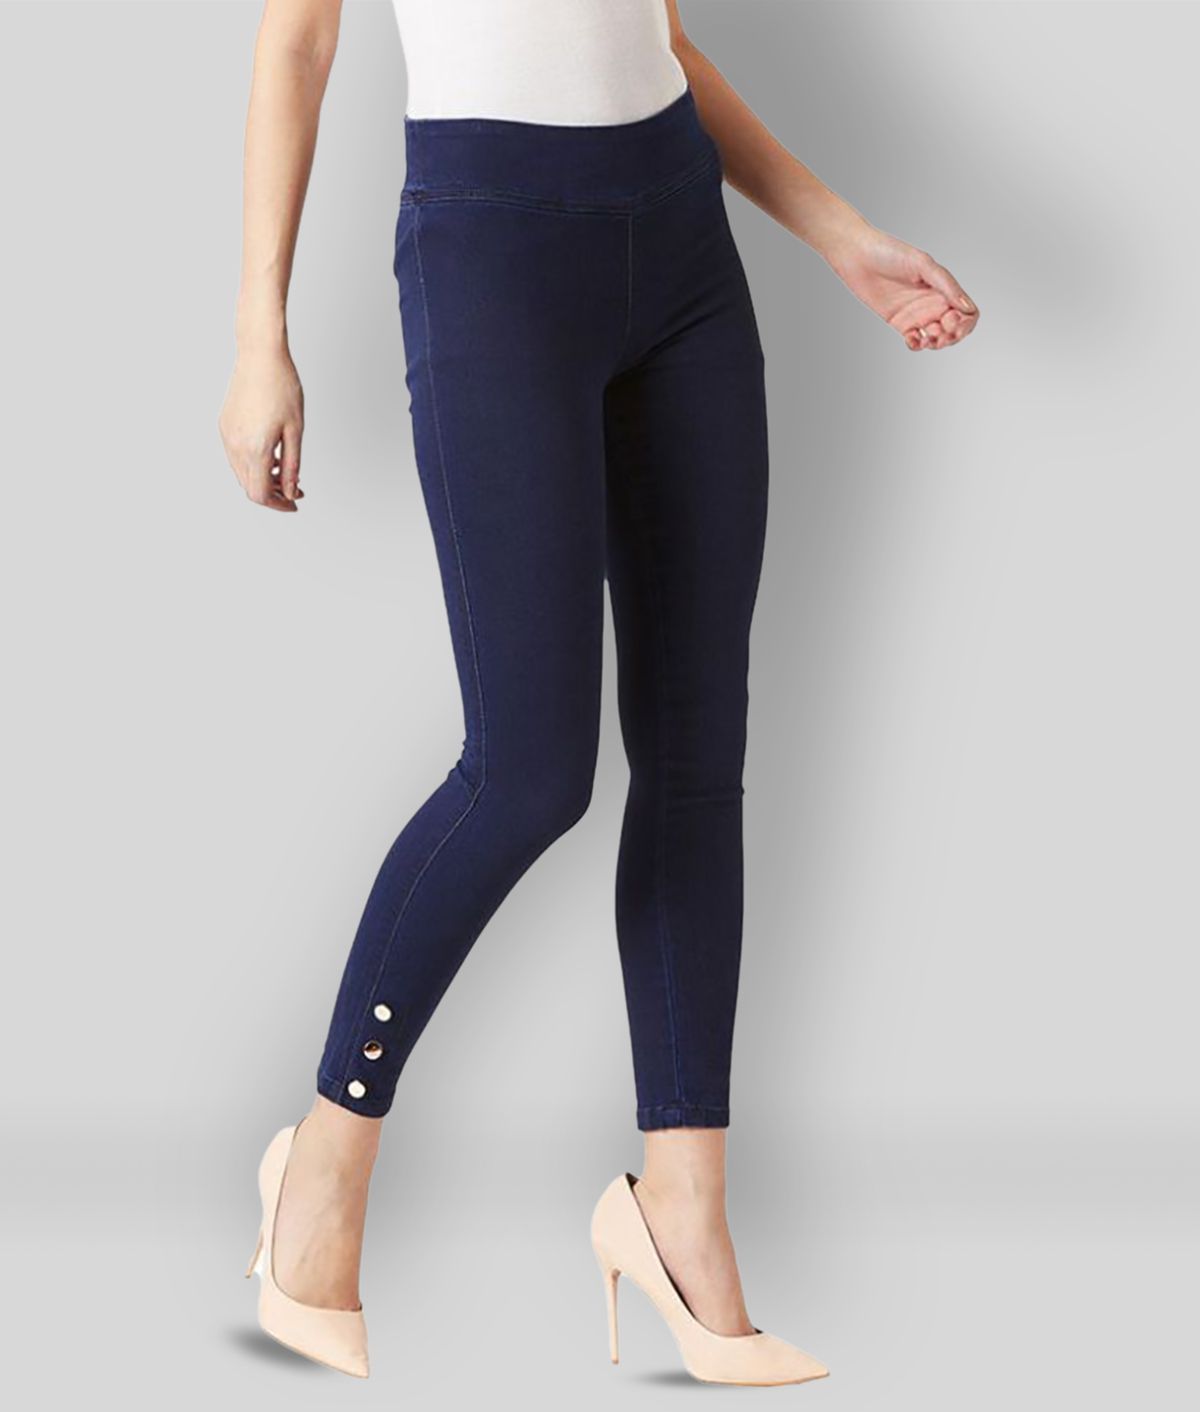     			Miss Chase - Navy Blue Cotton Women's Jeggings ( Pack of 1 )